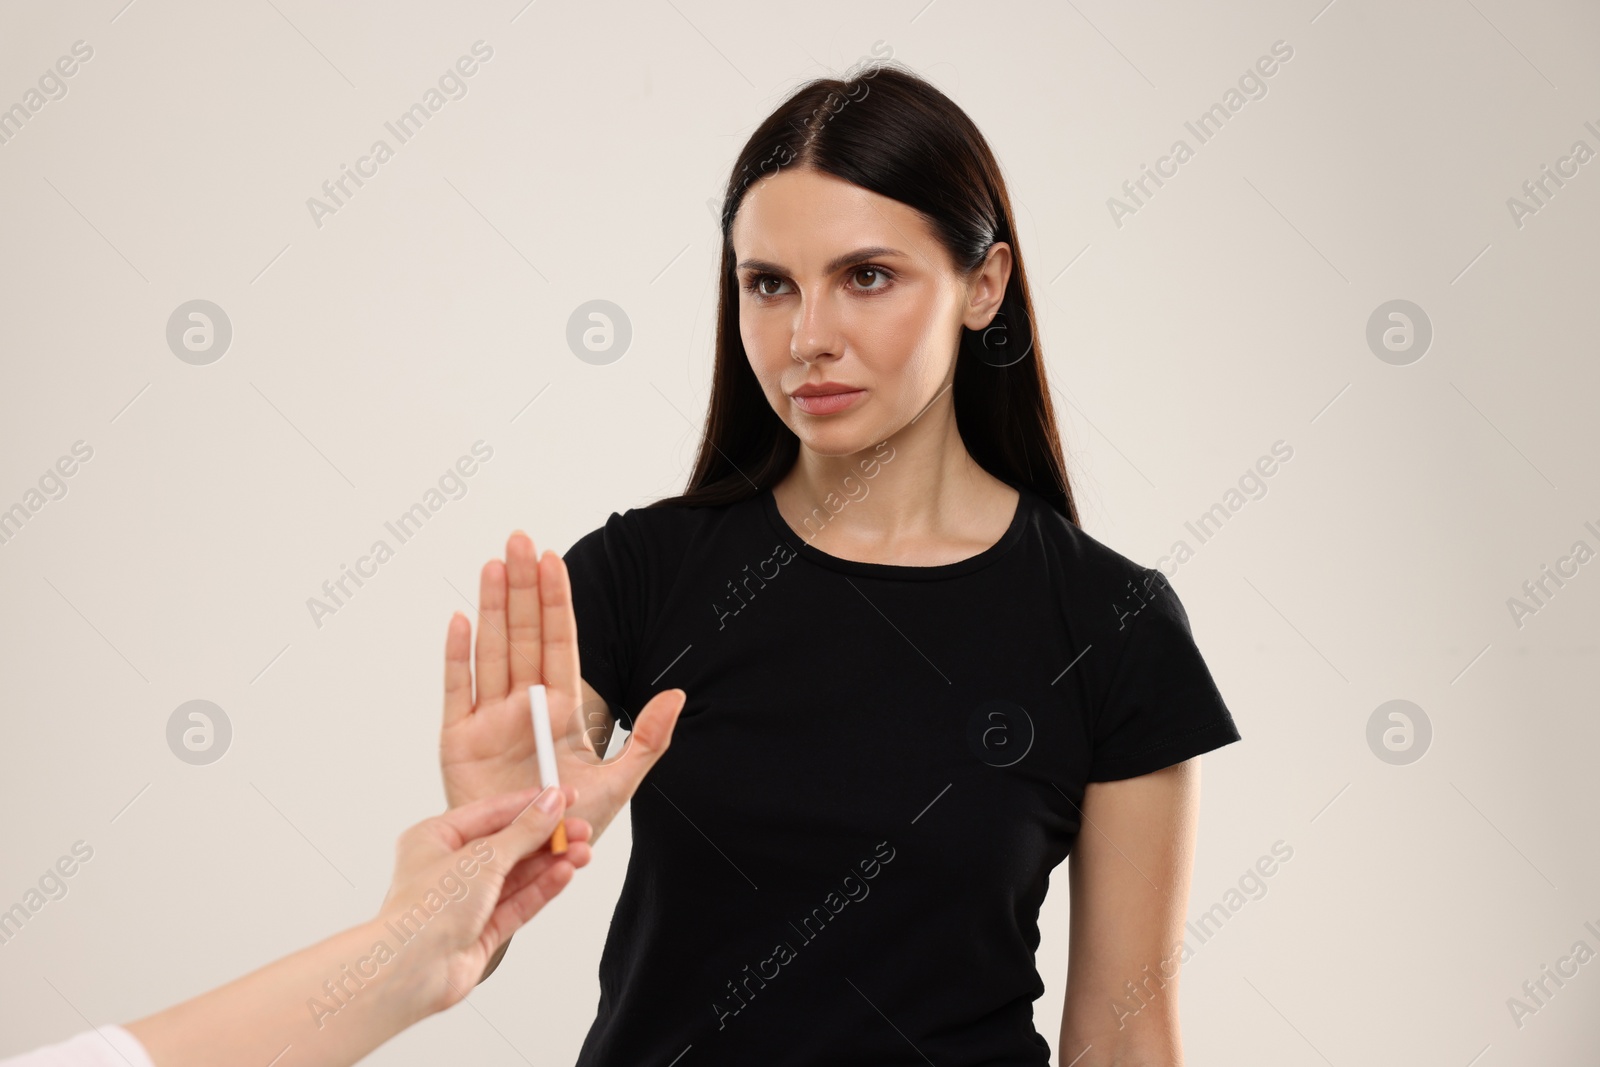 Photo of Stop smoking concept. Woman refusing cigarette on beige background